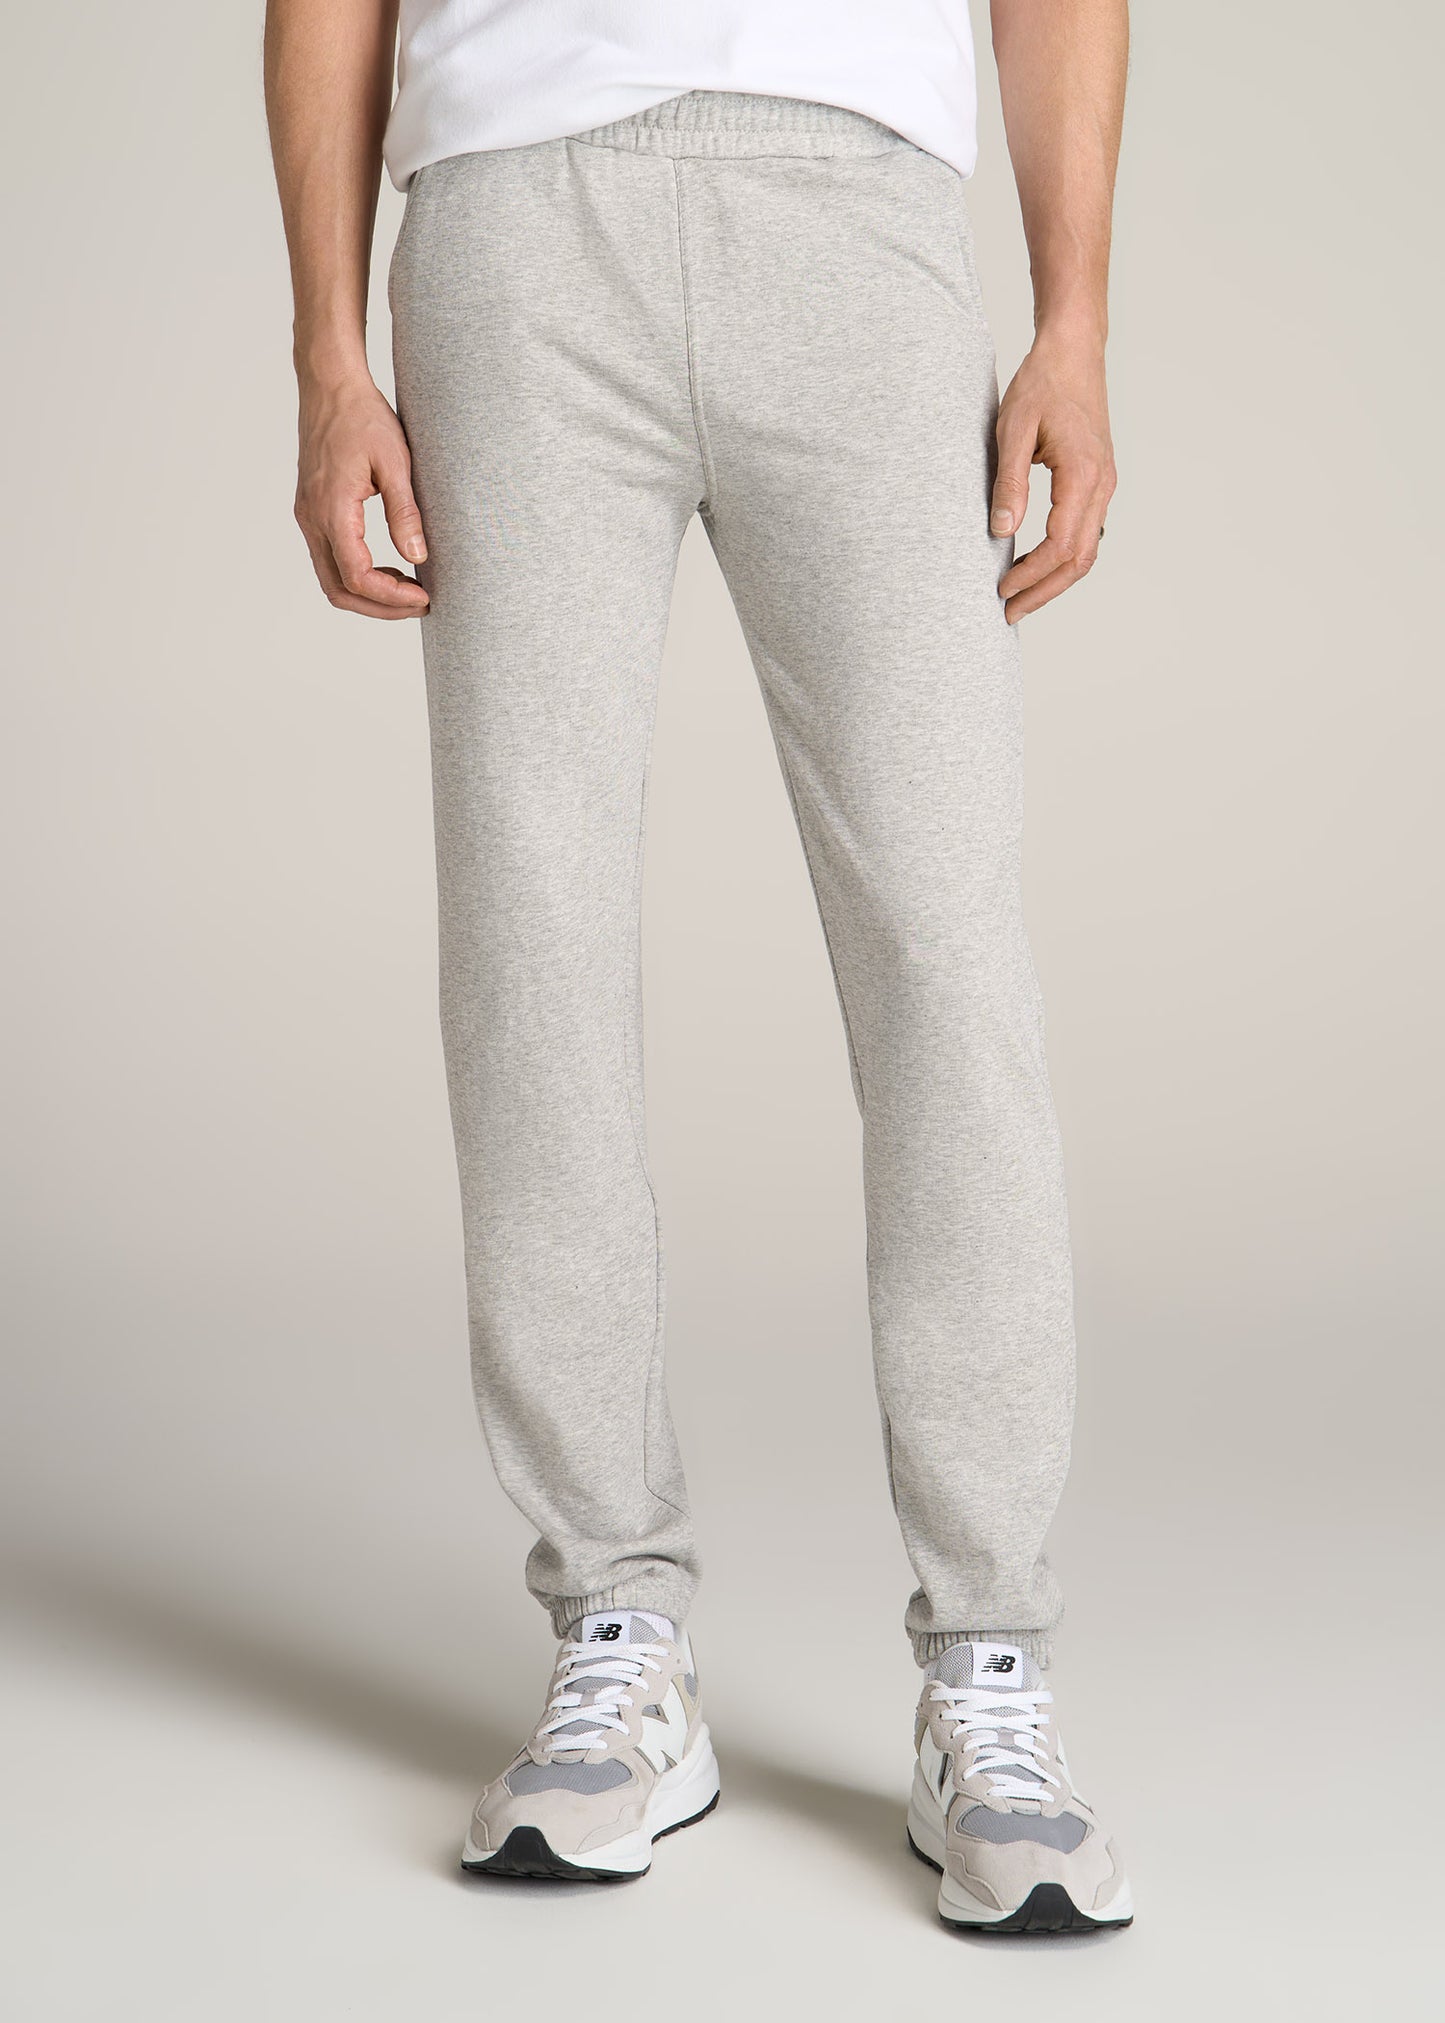 Men's Tall French Terry Sweatpants: Grey Mix Sweatpants – American